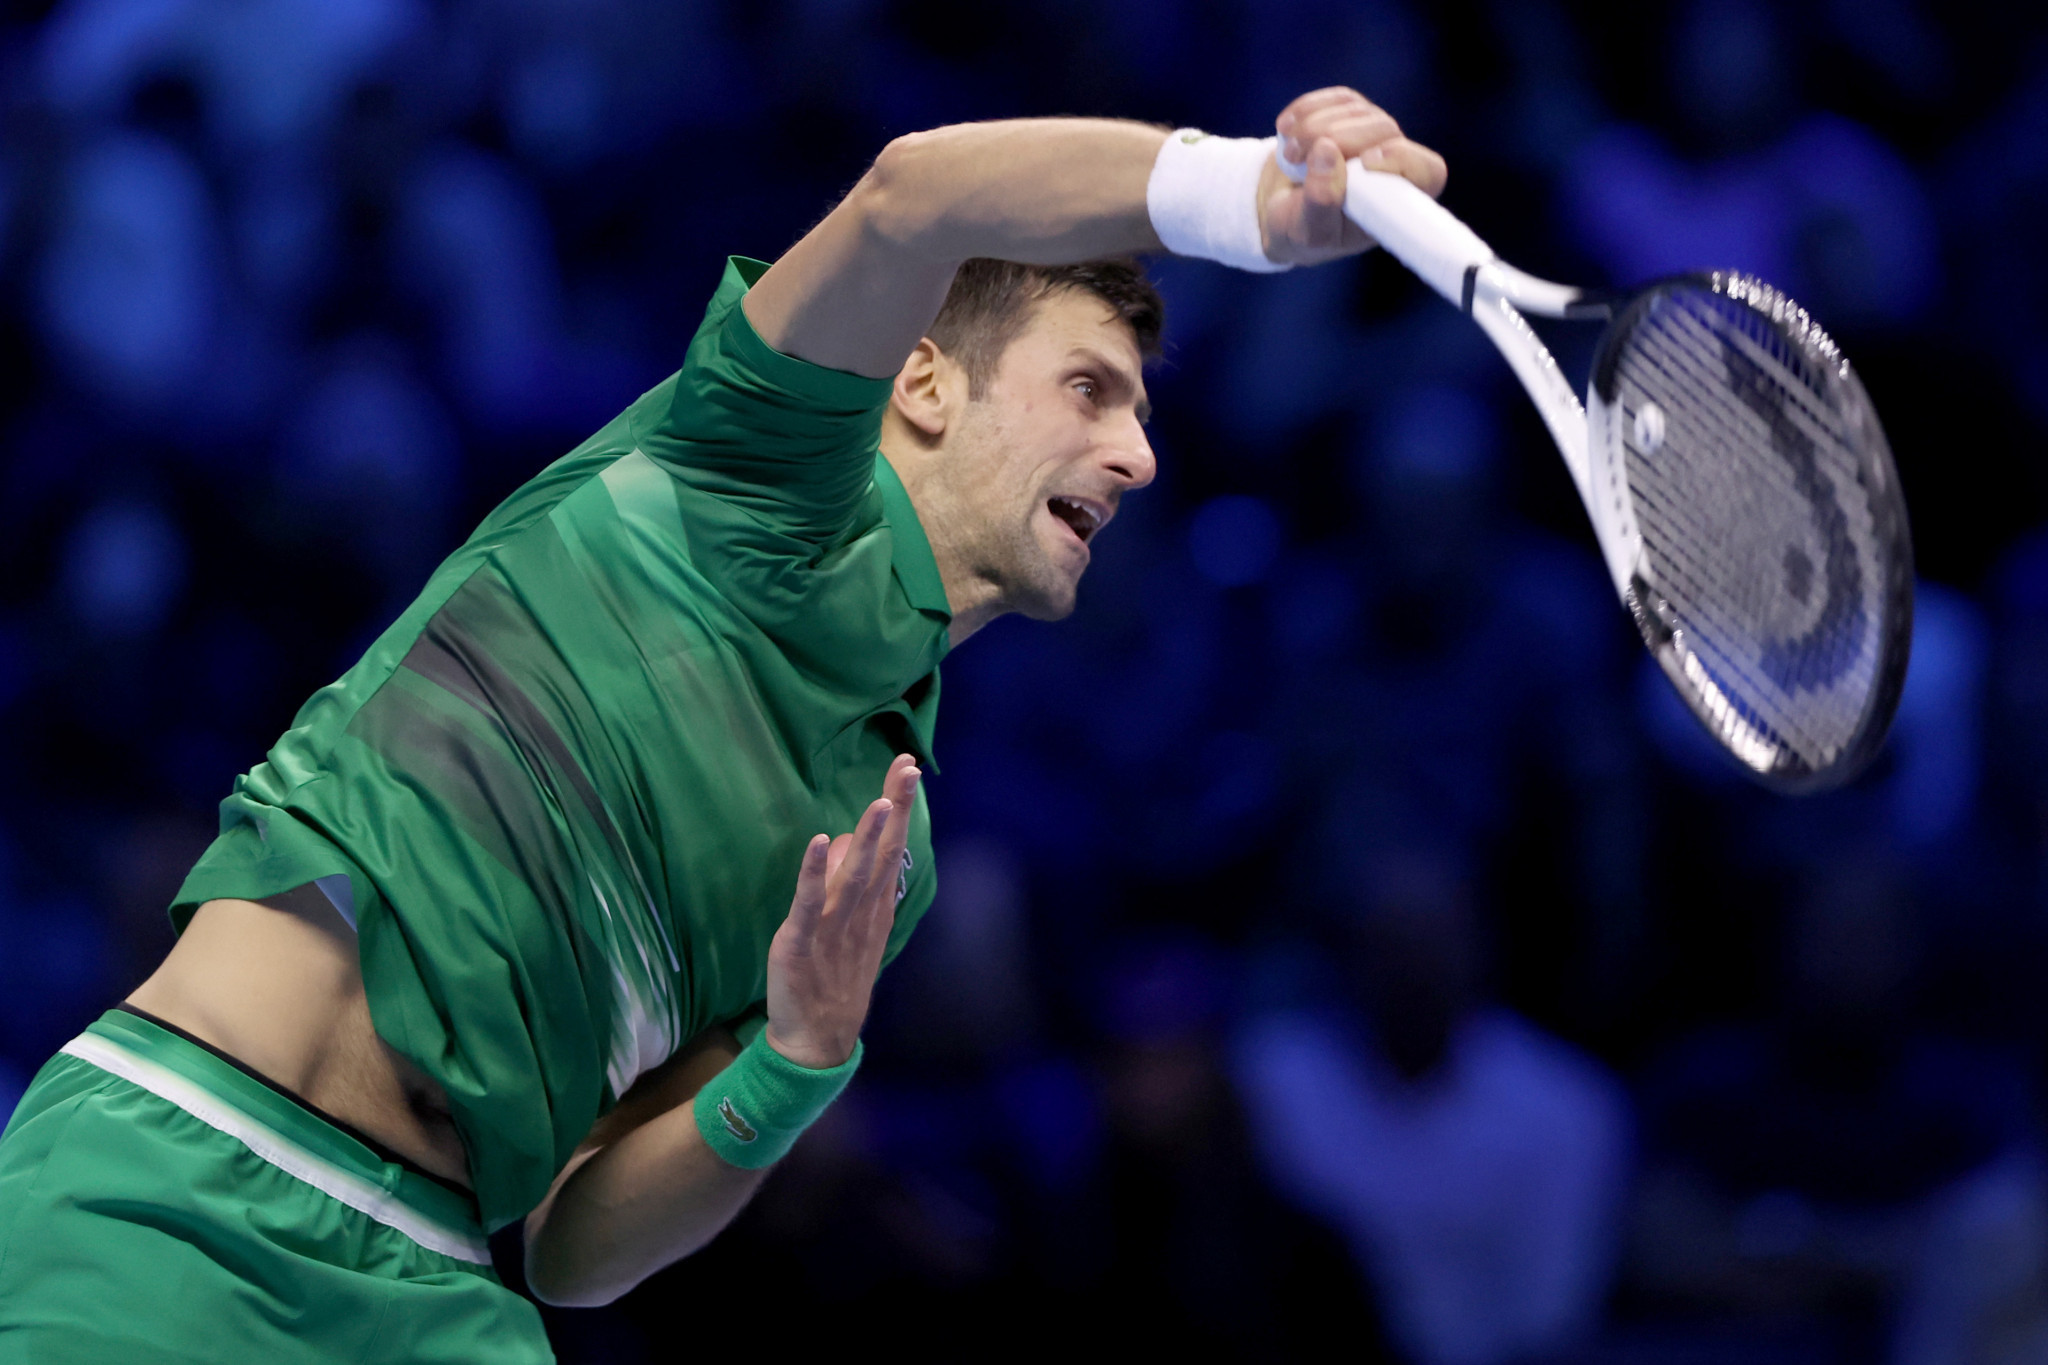 Novak Djokovic beat Daniil Medvedev in three sets to end his group campaign at the ATP Finals undefeated ©Getty Images